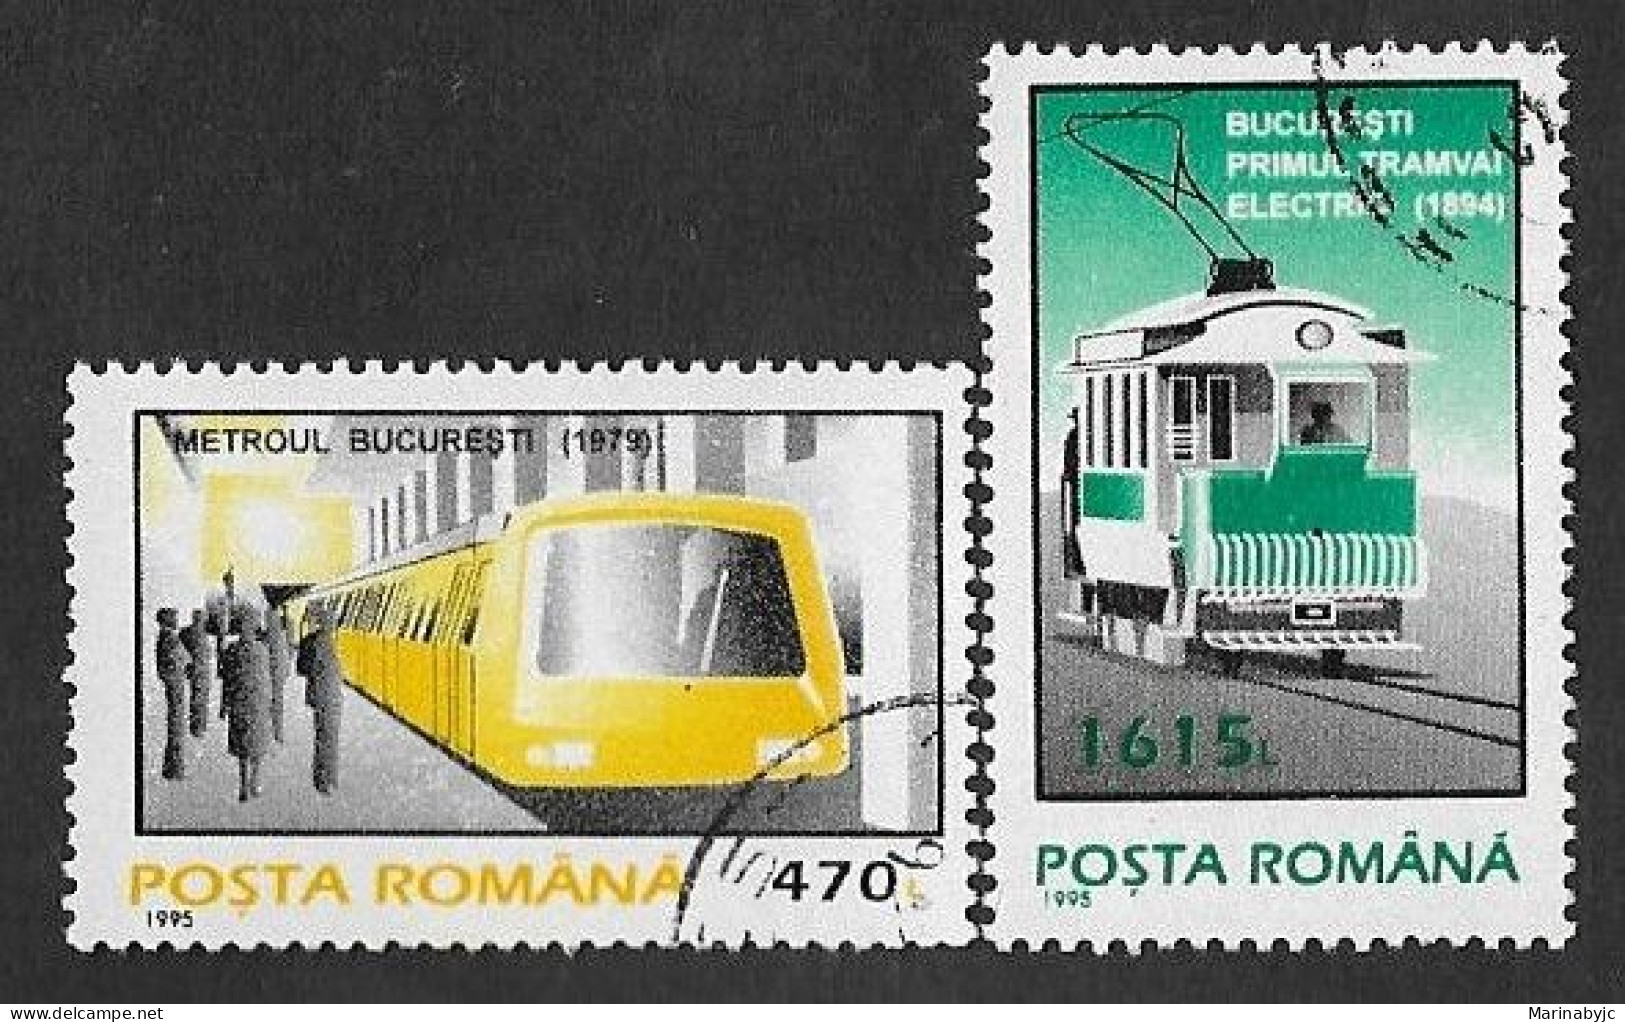 SE)1995 ROMANIA, FROM THE TRAINS SERIES, THE BUCHAREST METRO, 1ST ELECTRIC TRAIN, 2 CTO STAMPS - Usati